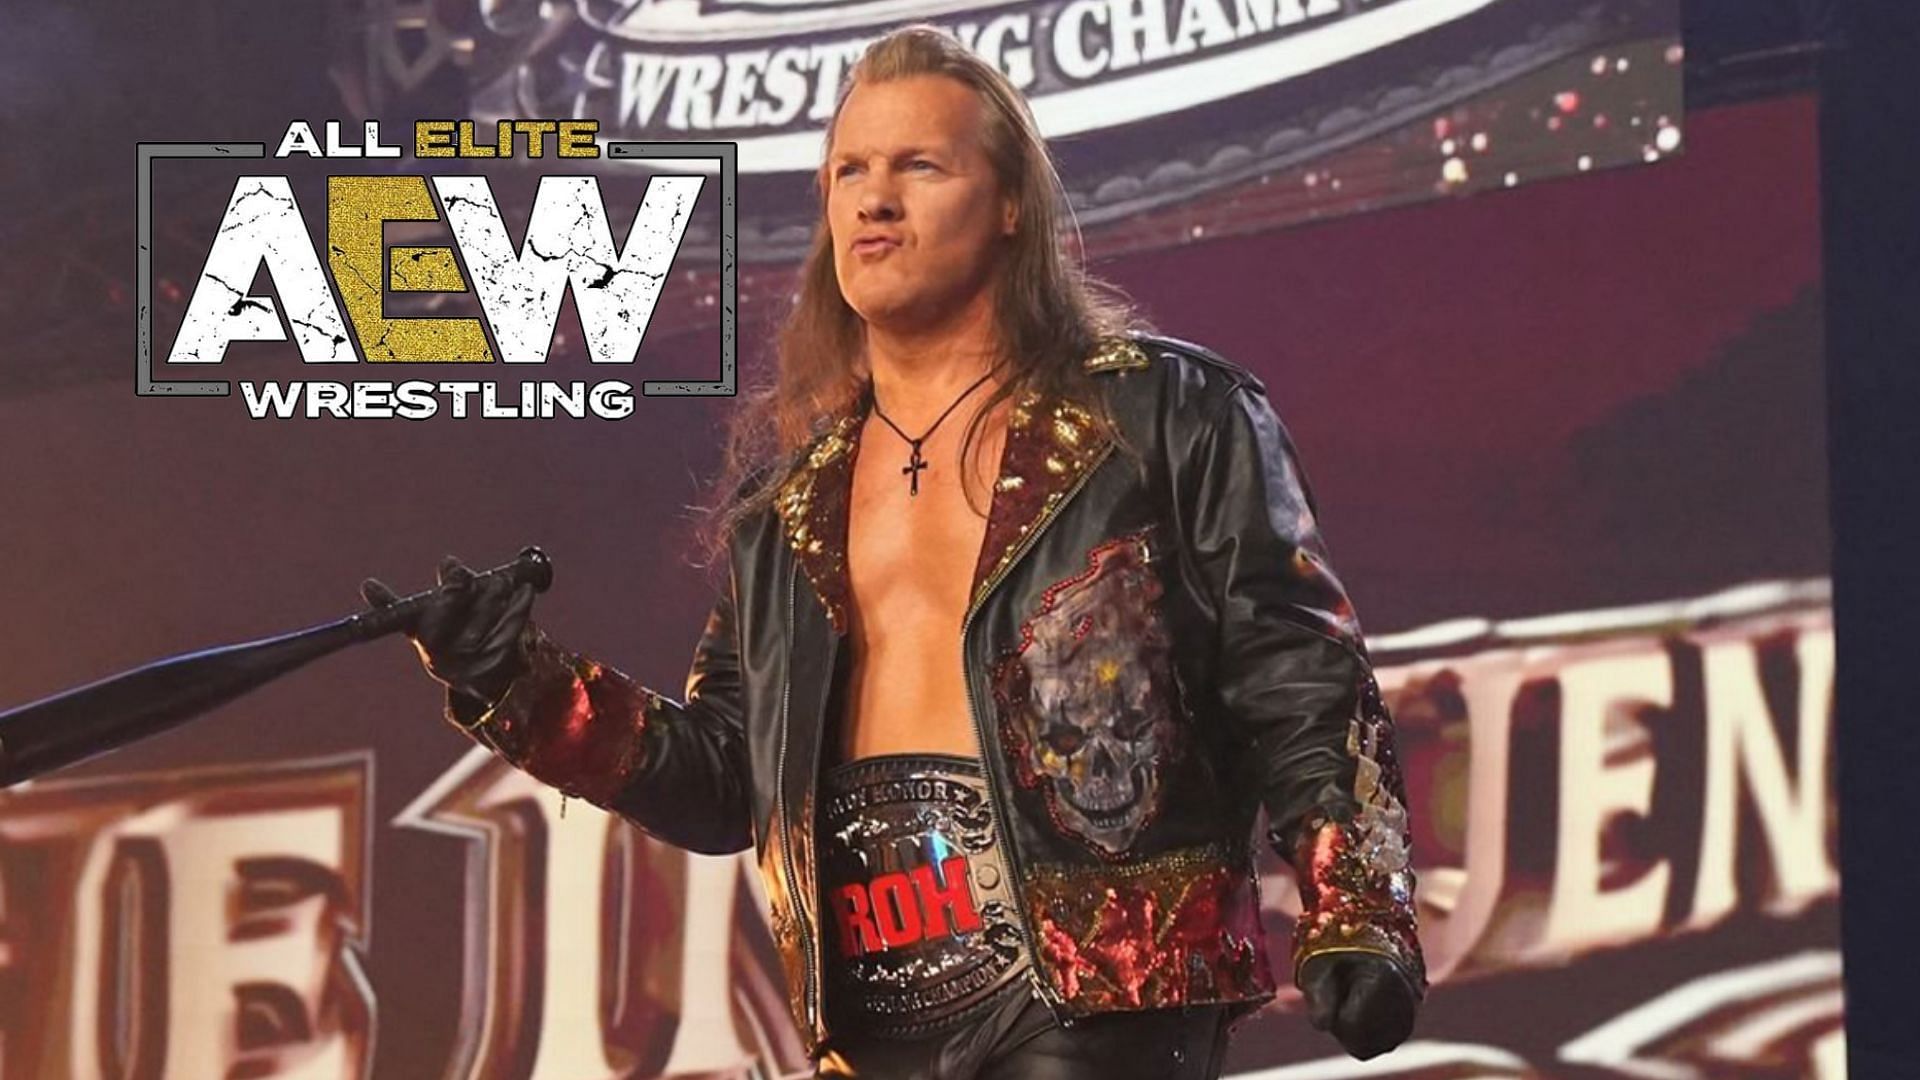 Top AEW star Chris Jericho has been dominant as ROH World Champion in the past few months.